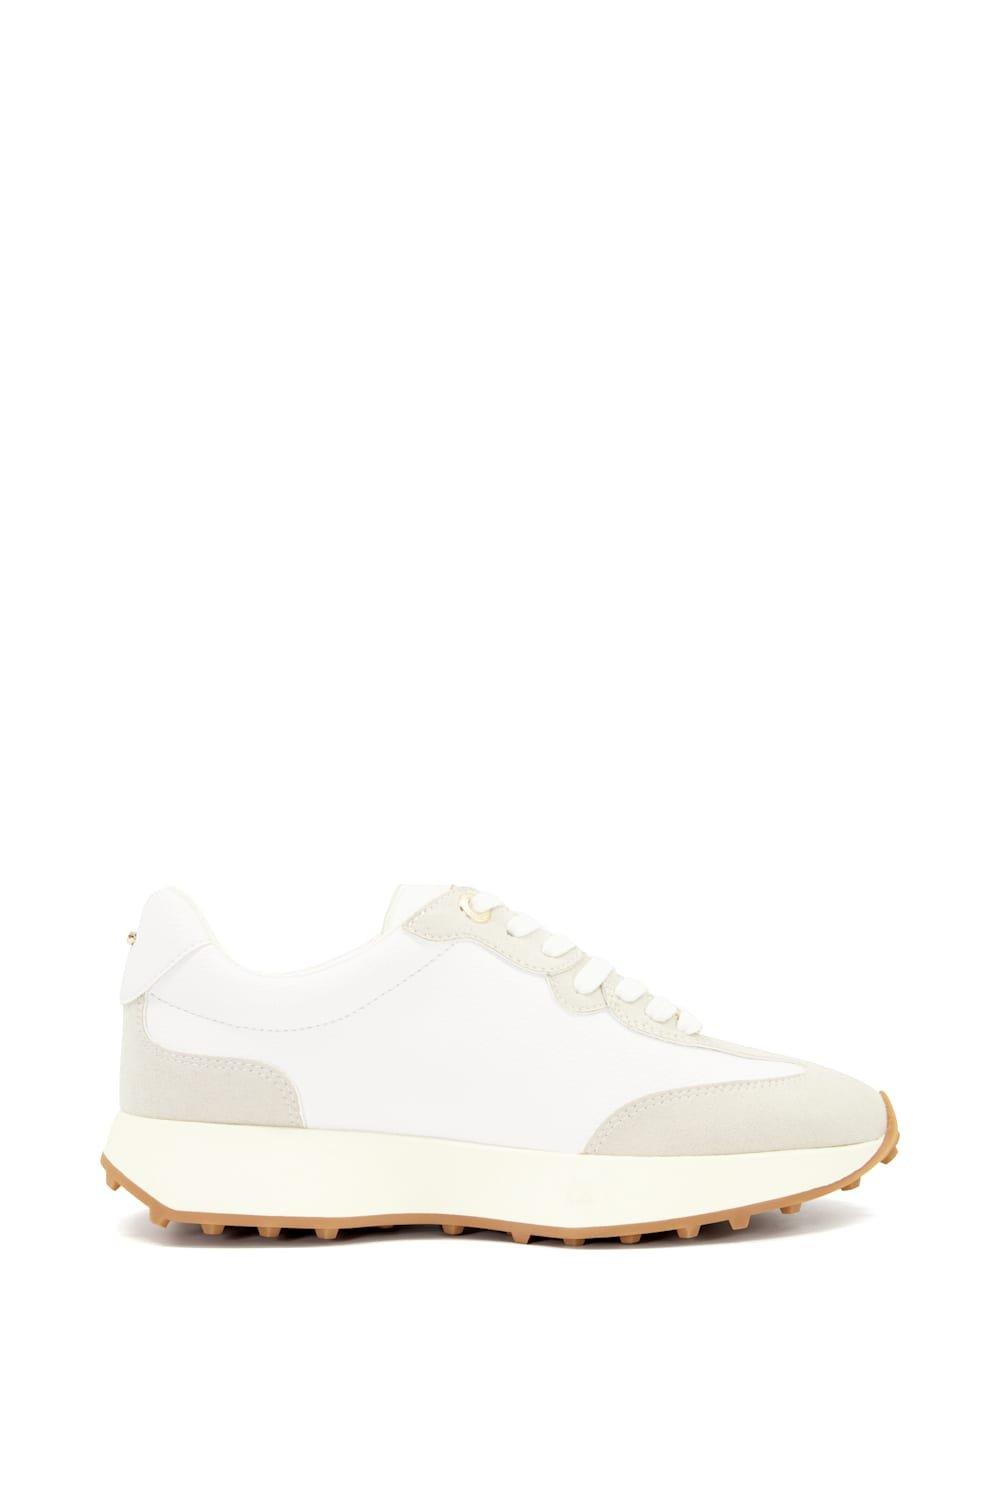 Trainers | 'Emboss' Trainers | Dune London